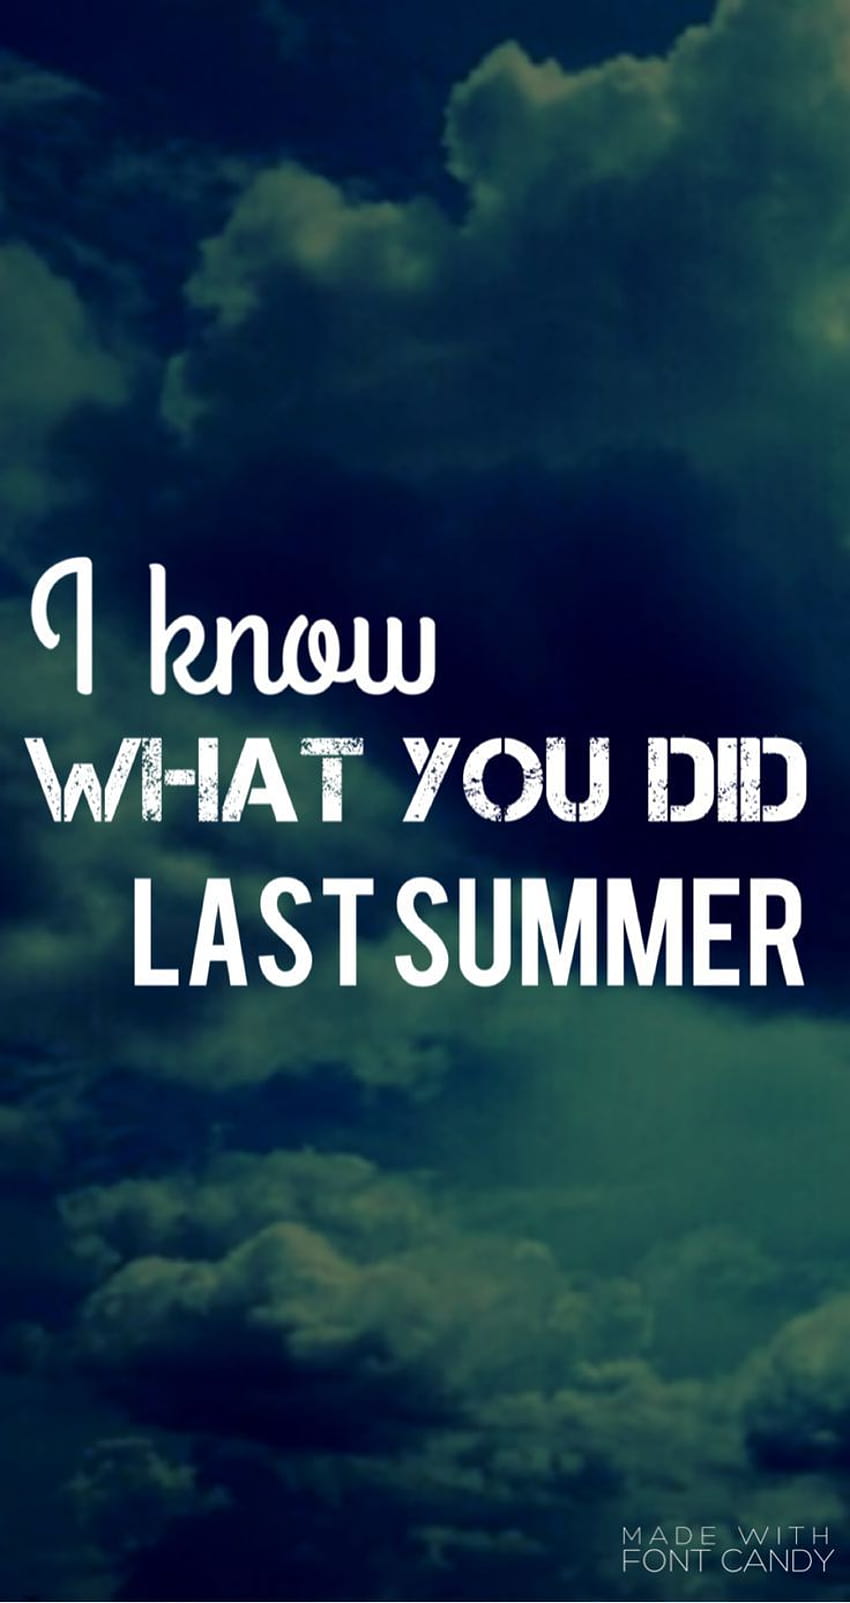 shawn mendes i know what you did last summer HD phone wallpaper